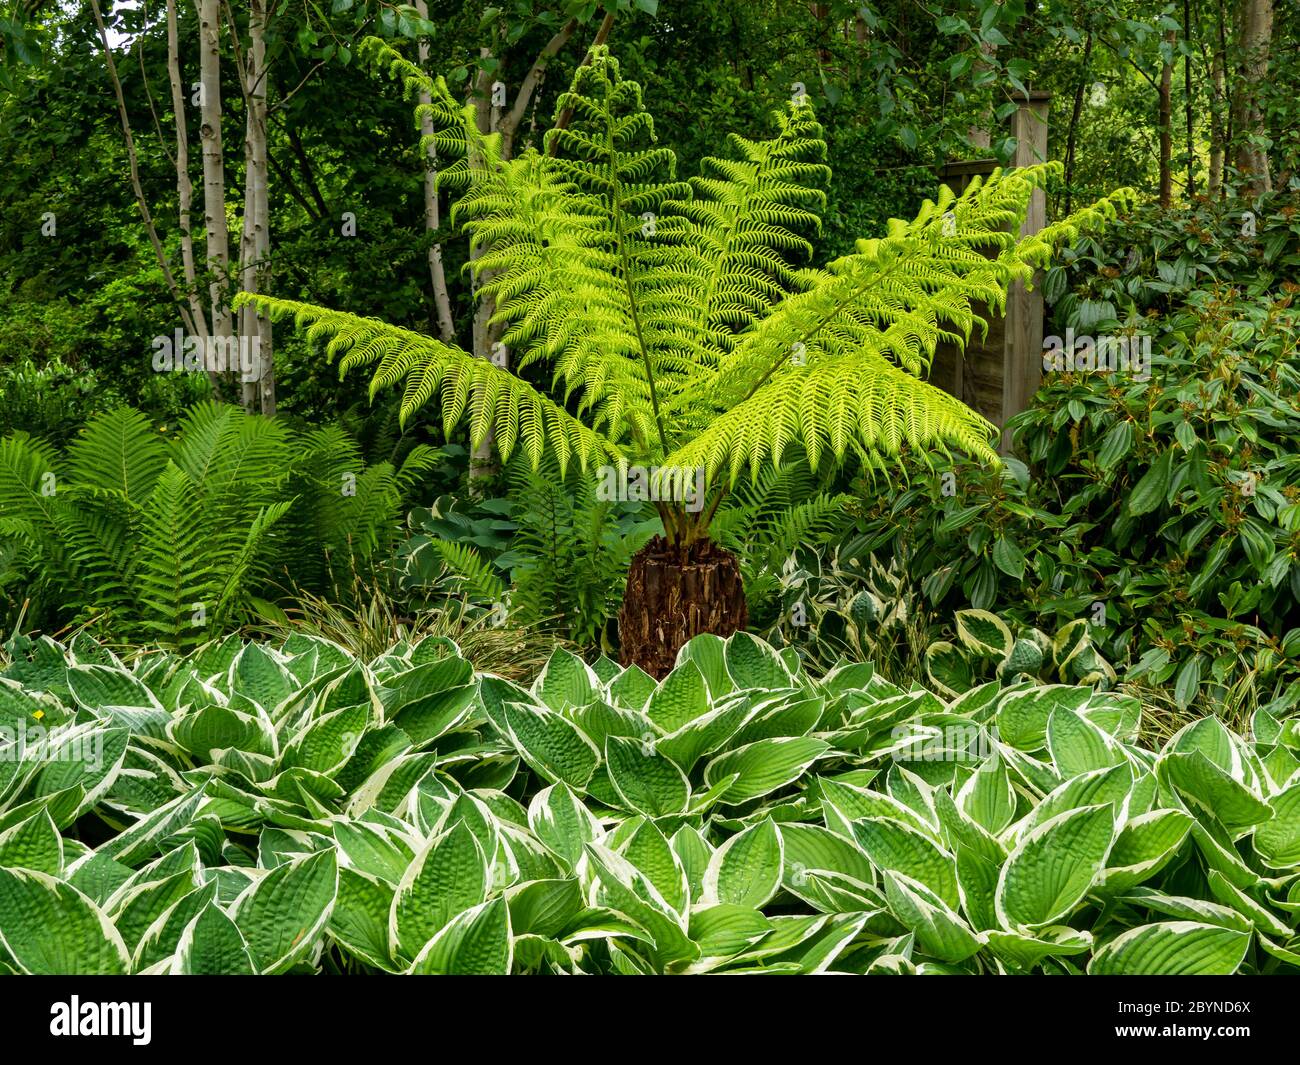 Green leaves of Hosta plants and ferns including a tree fern in a garden Stock Photo